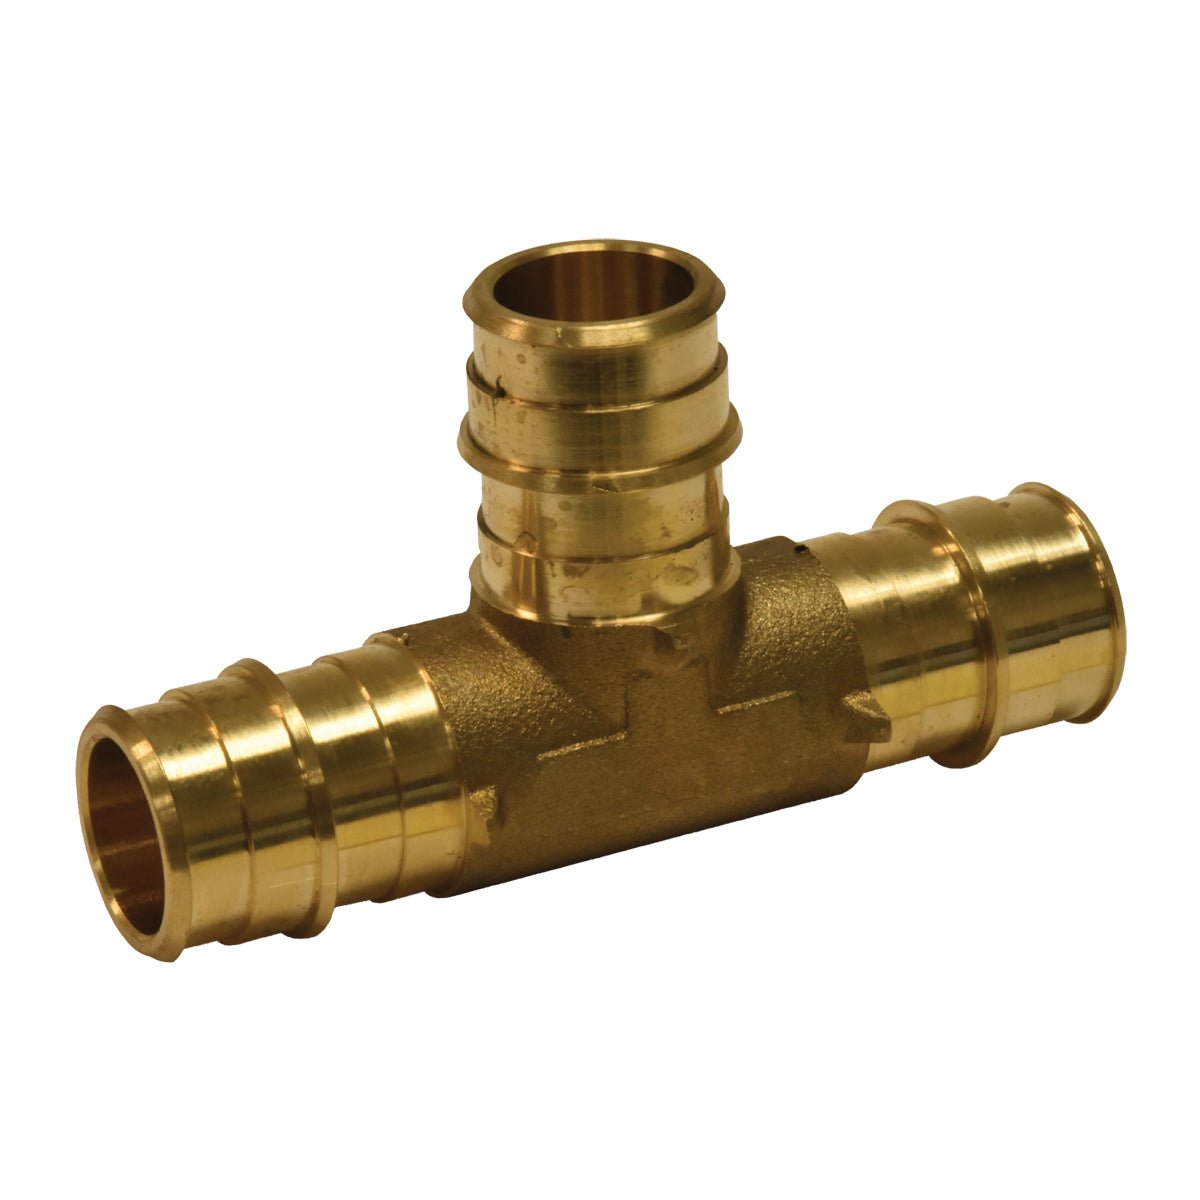 Eastman Brass Expansion PEX Tee – 1/2 in. x 1/2 in. x 3/4 in.